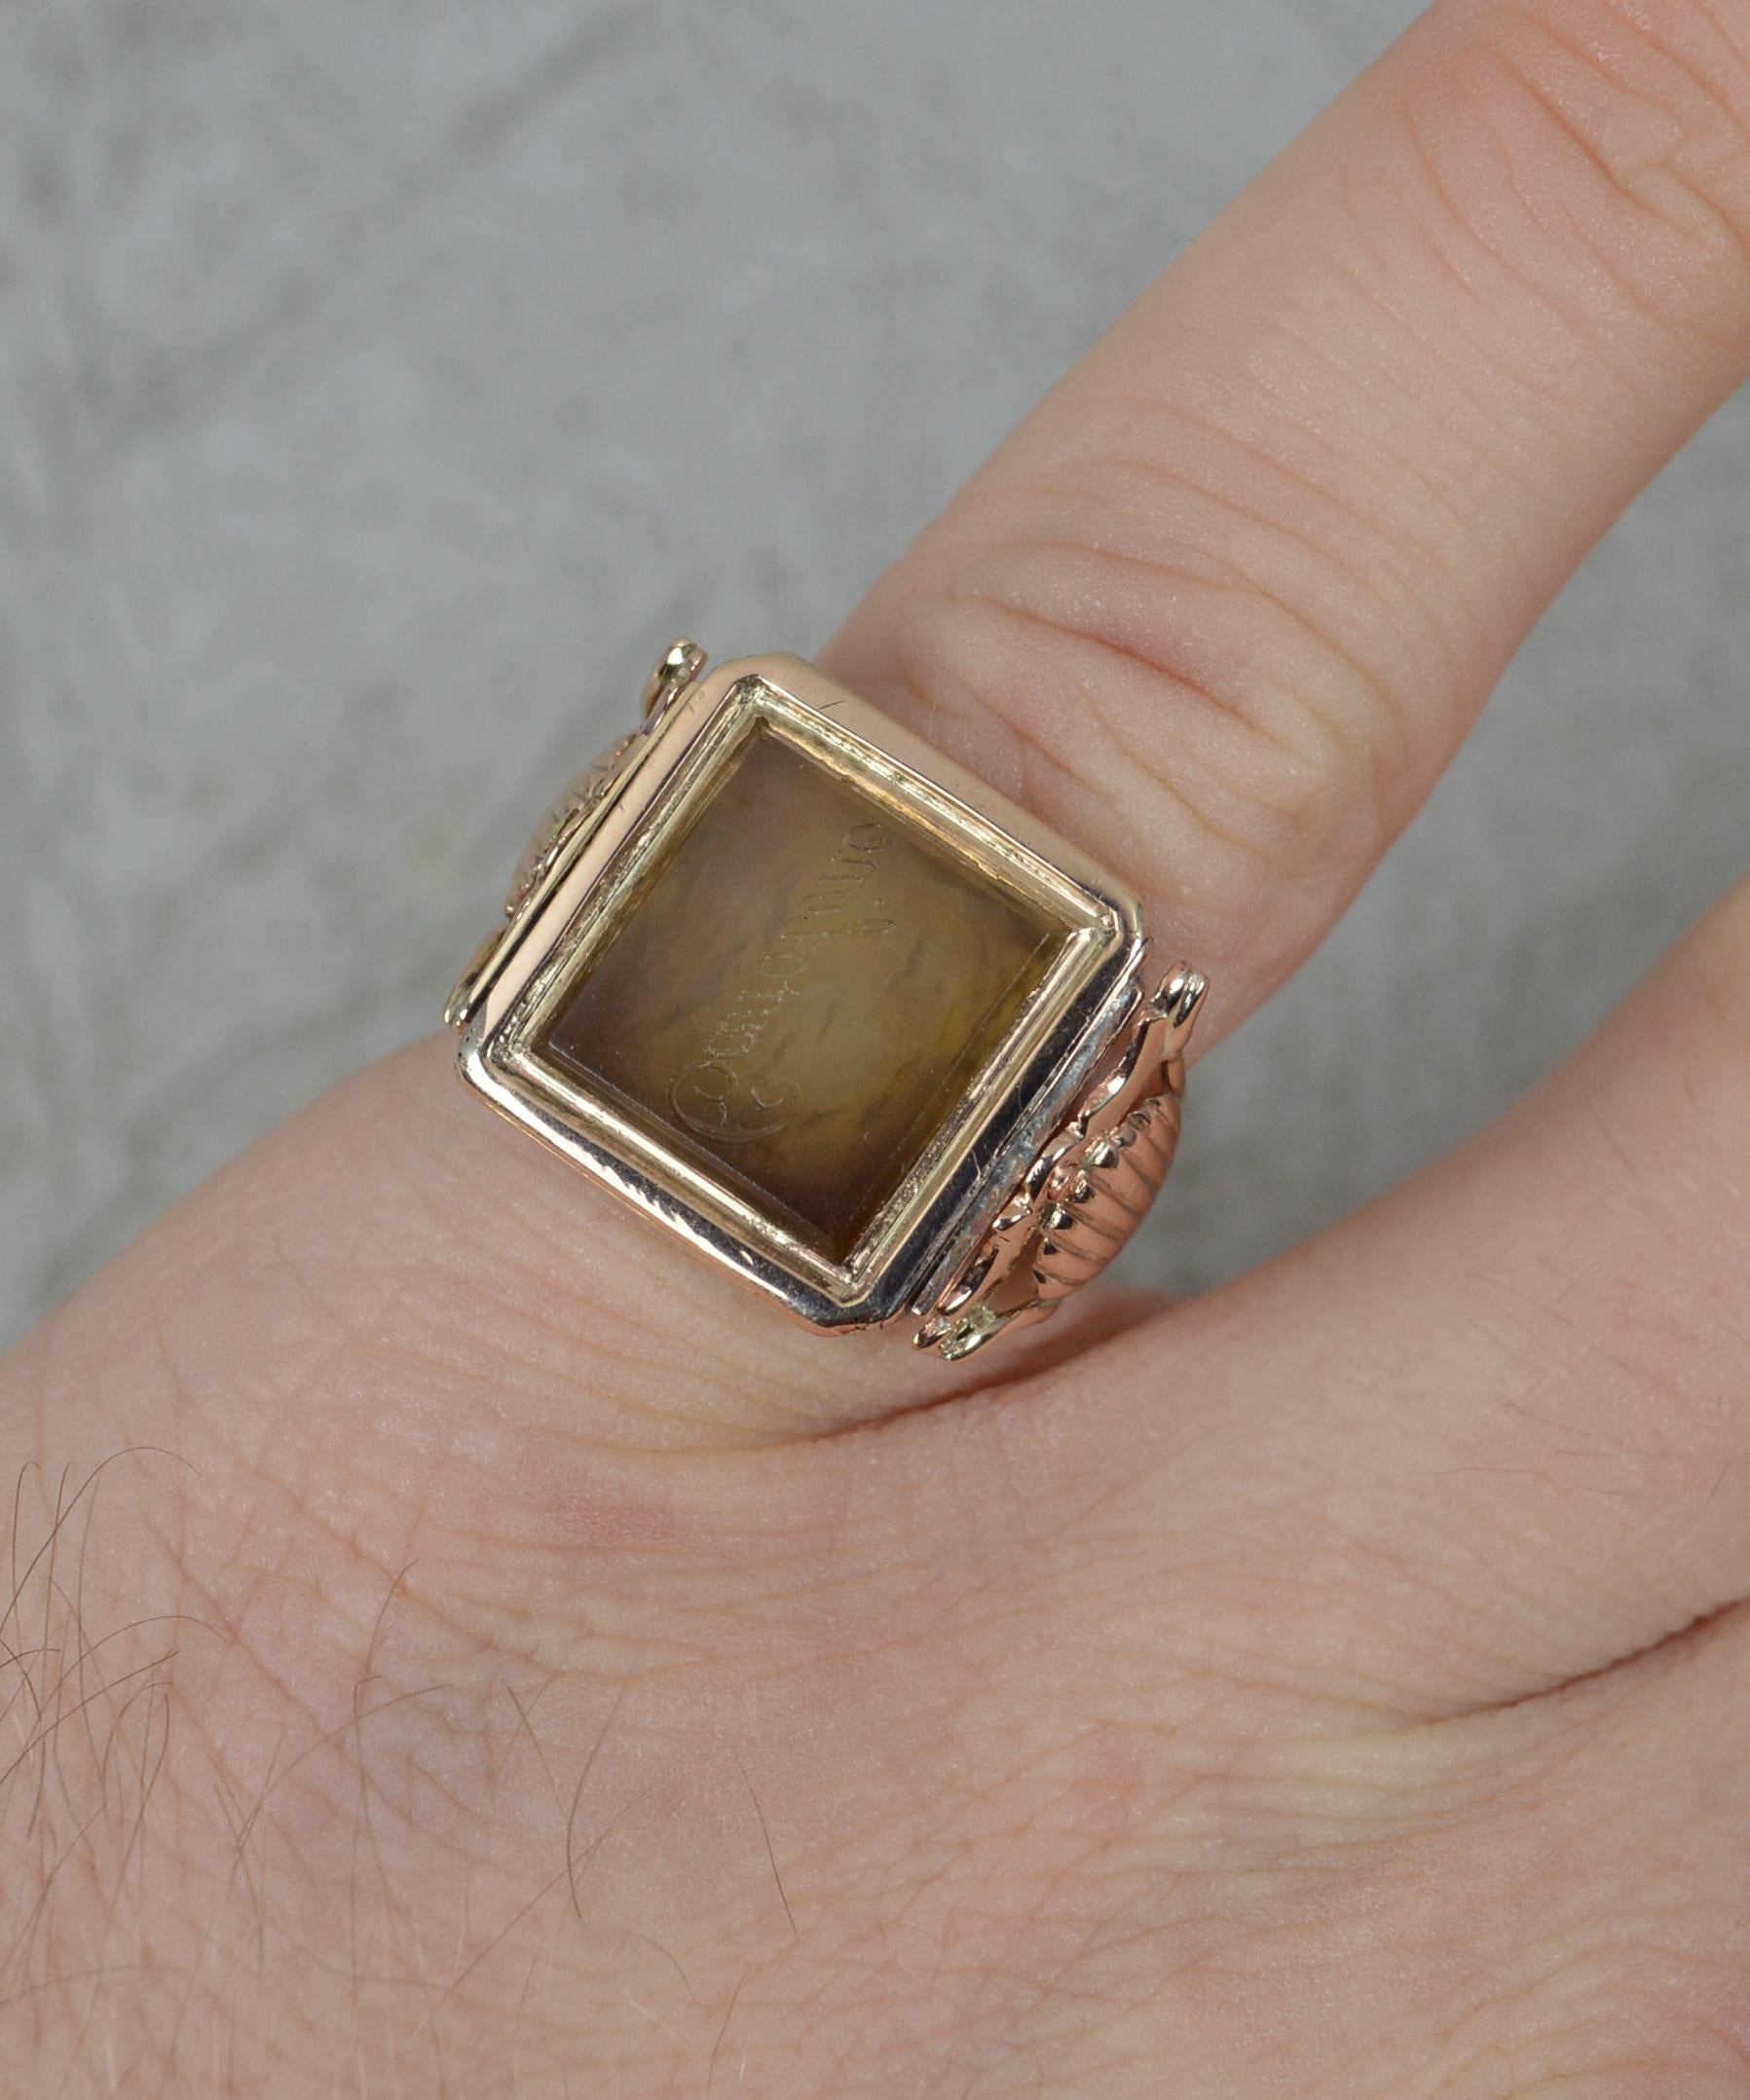 A Georgian era ring circa 1820.
Solid 15 carat rose gold example with pierced shell shank.
Designed with a square agate panel whch swivels. 15mm x 15mm head.
The stone is plain to one side and engraved Caroline the other.

CONDITION ; Very good for